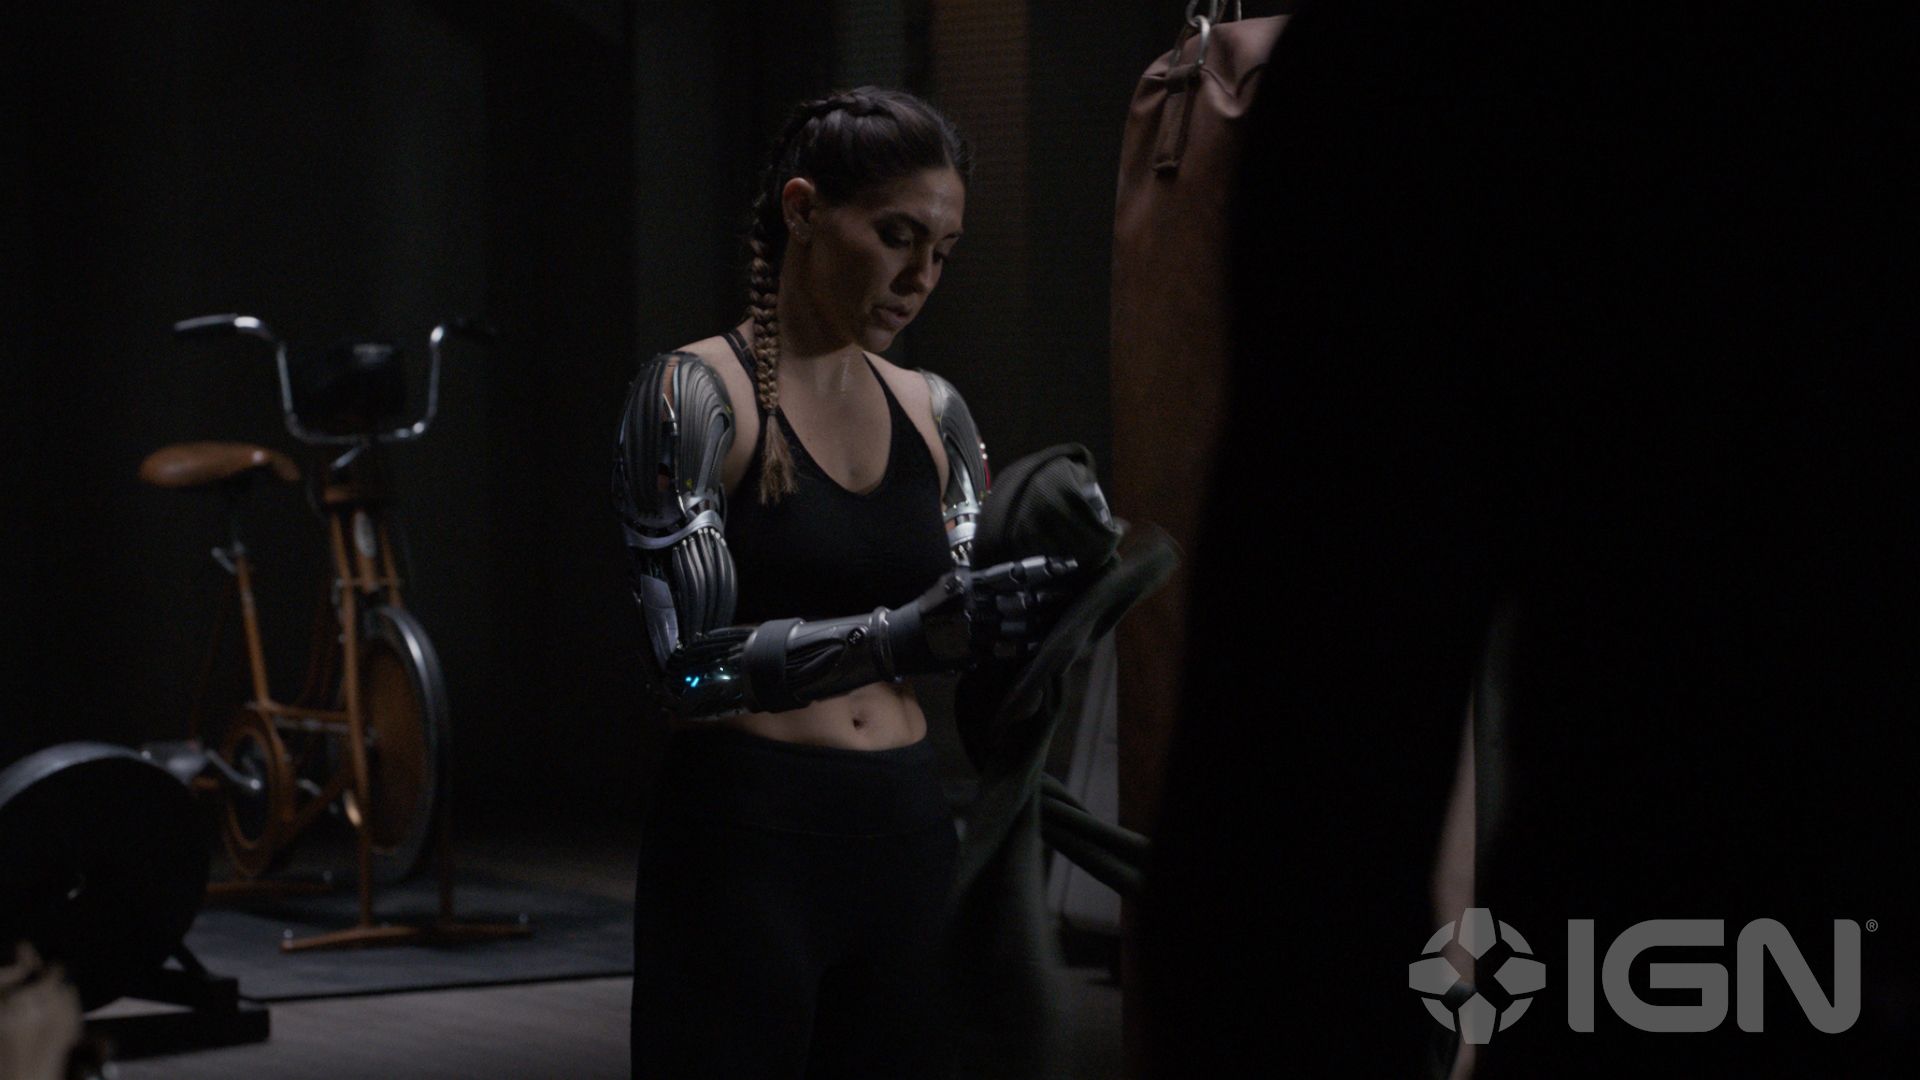 Agents of SHIELD's Yo-Yo gives her new robotic arm prosthetics a workout.